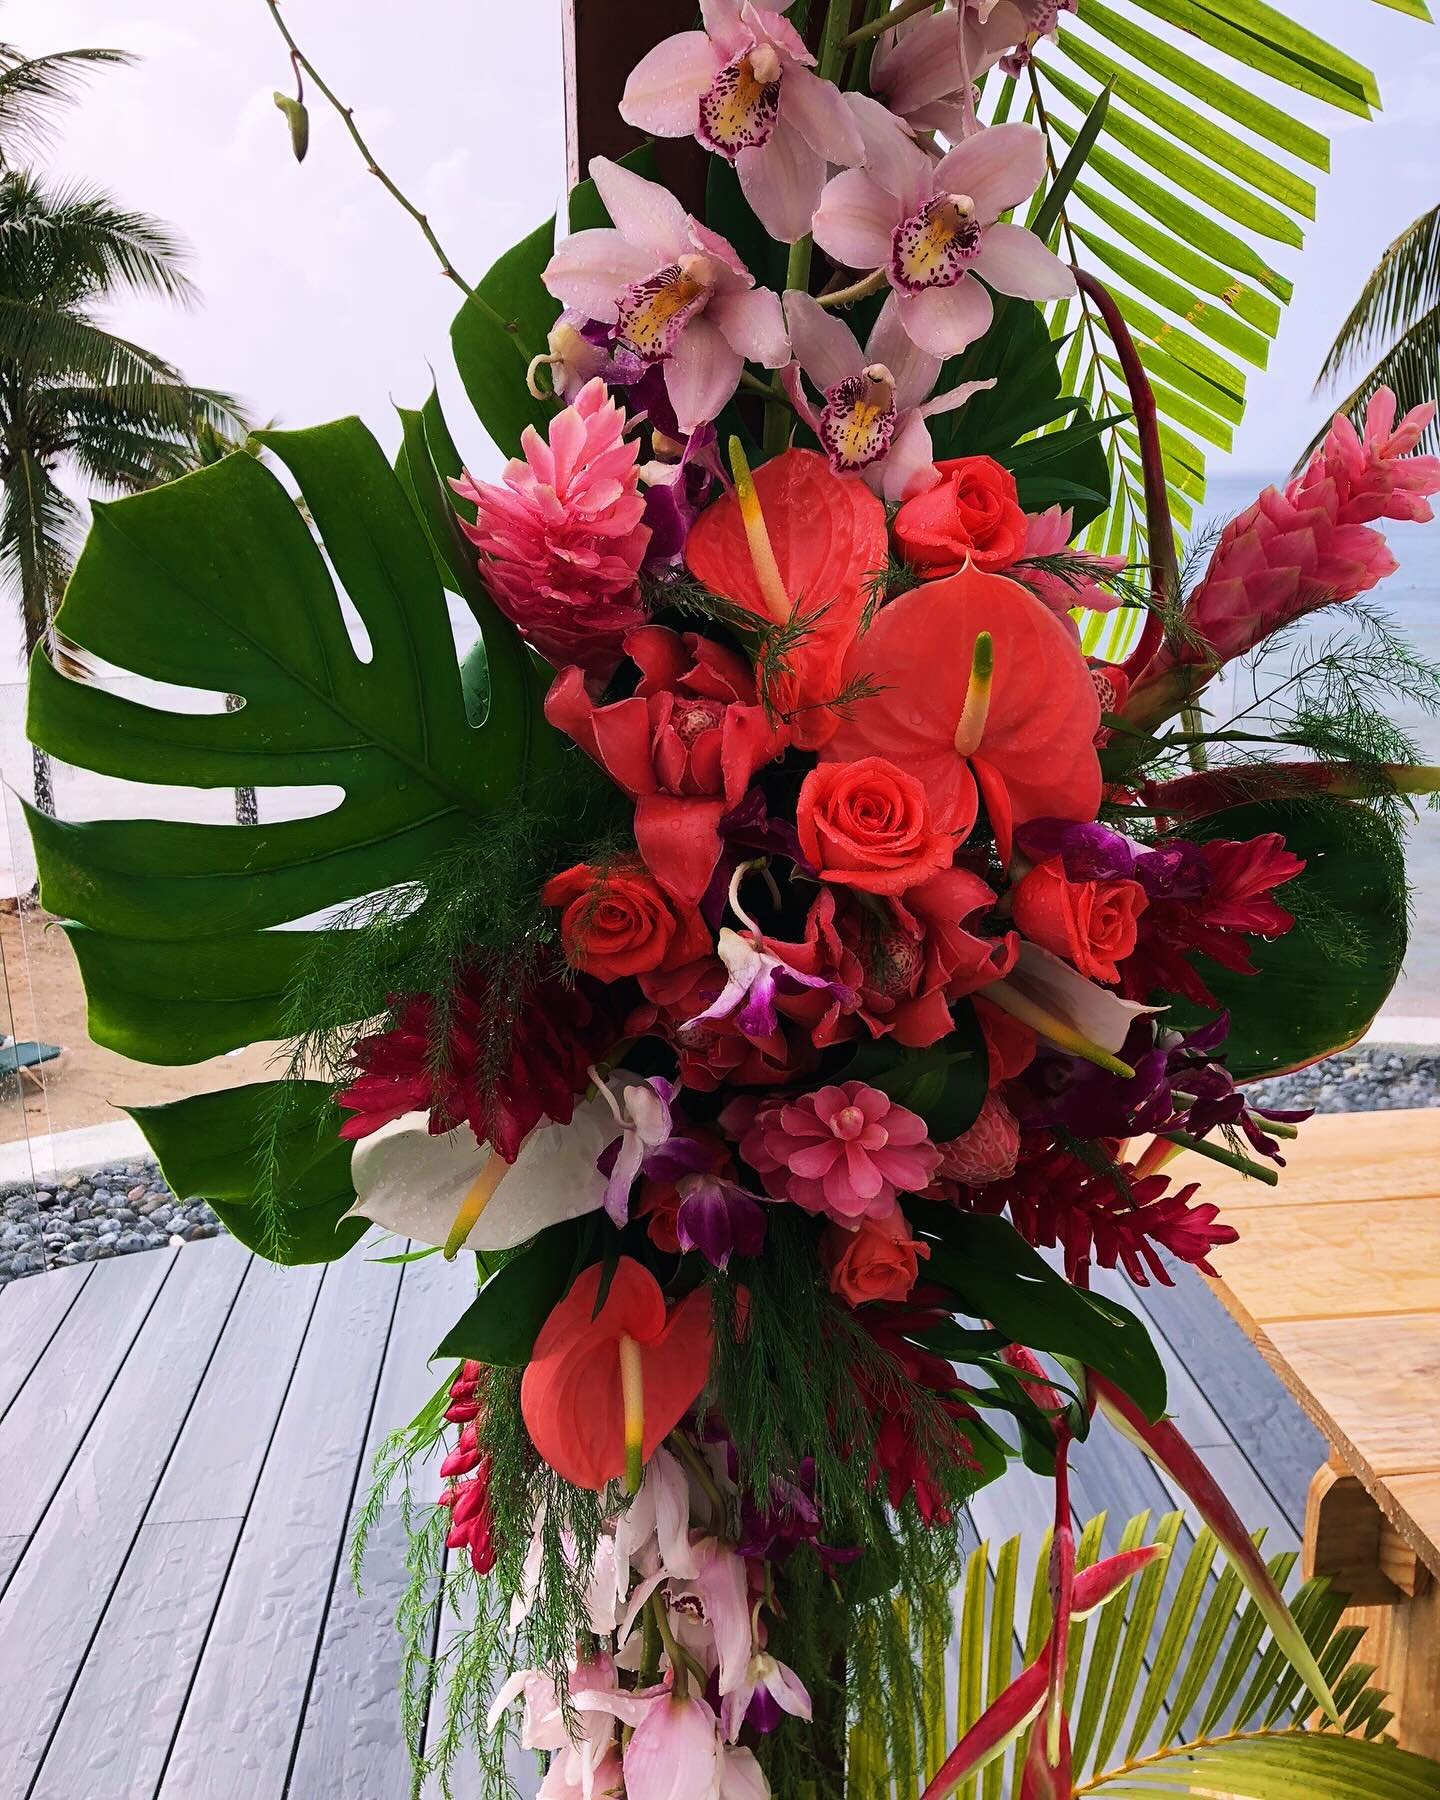 Happy Friday, everyone! Check out this beautiful tropical flower arrangement. 

The various tropical plants &amp; flowers of the Caribbean really make an amazing addition to any destination wedding or event!

#TropicalVibes #DestinationWedding #Weeke